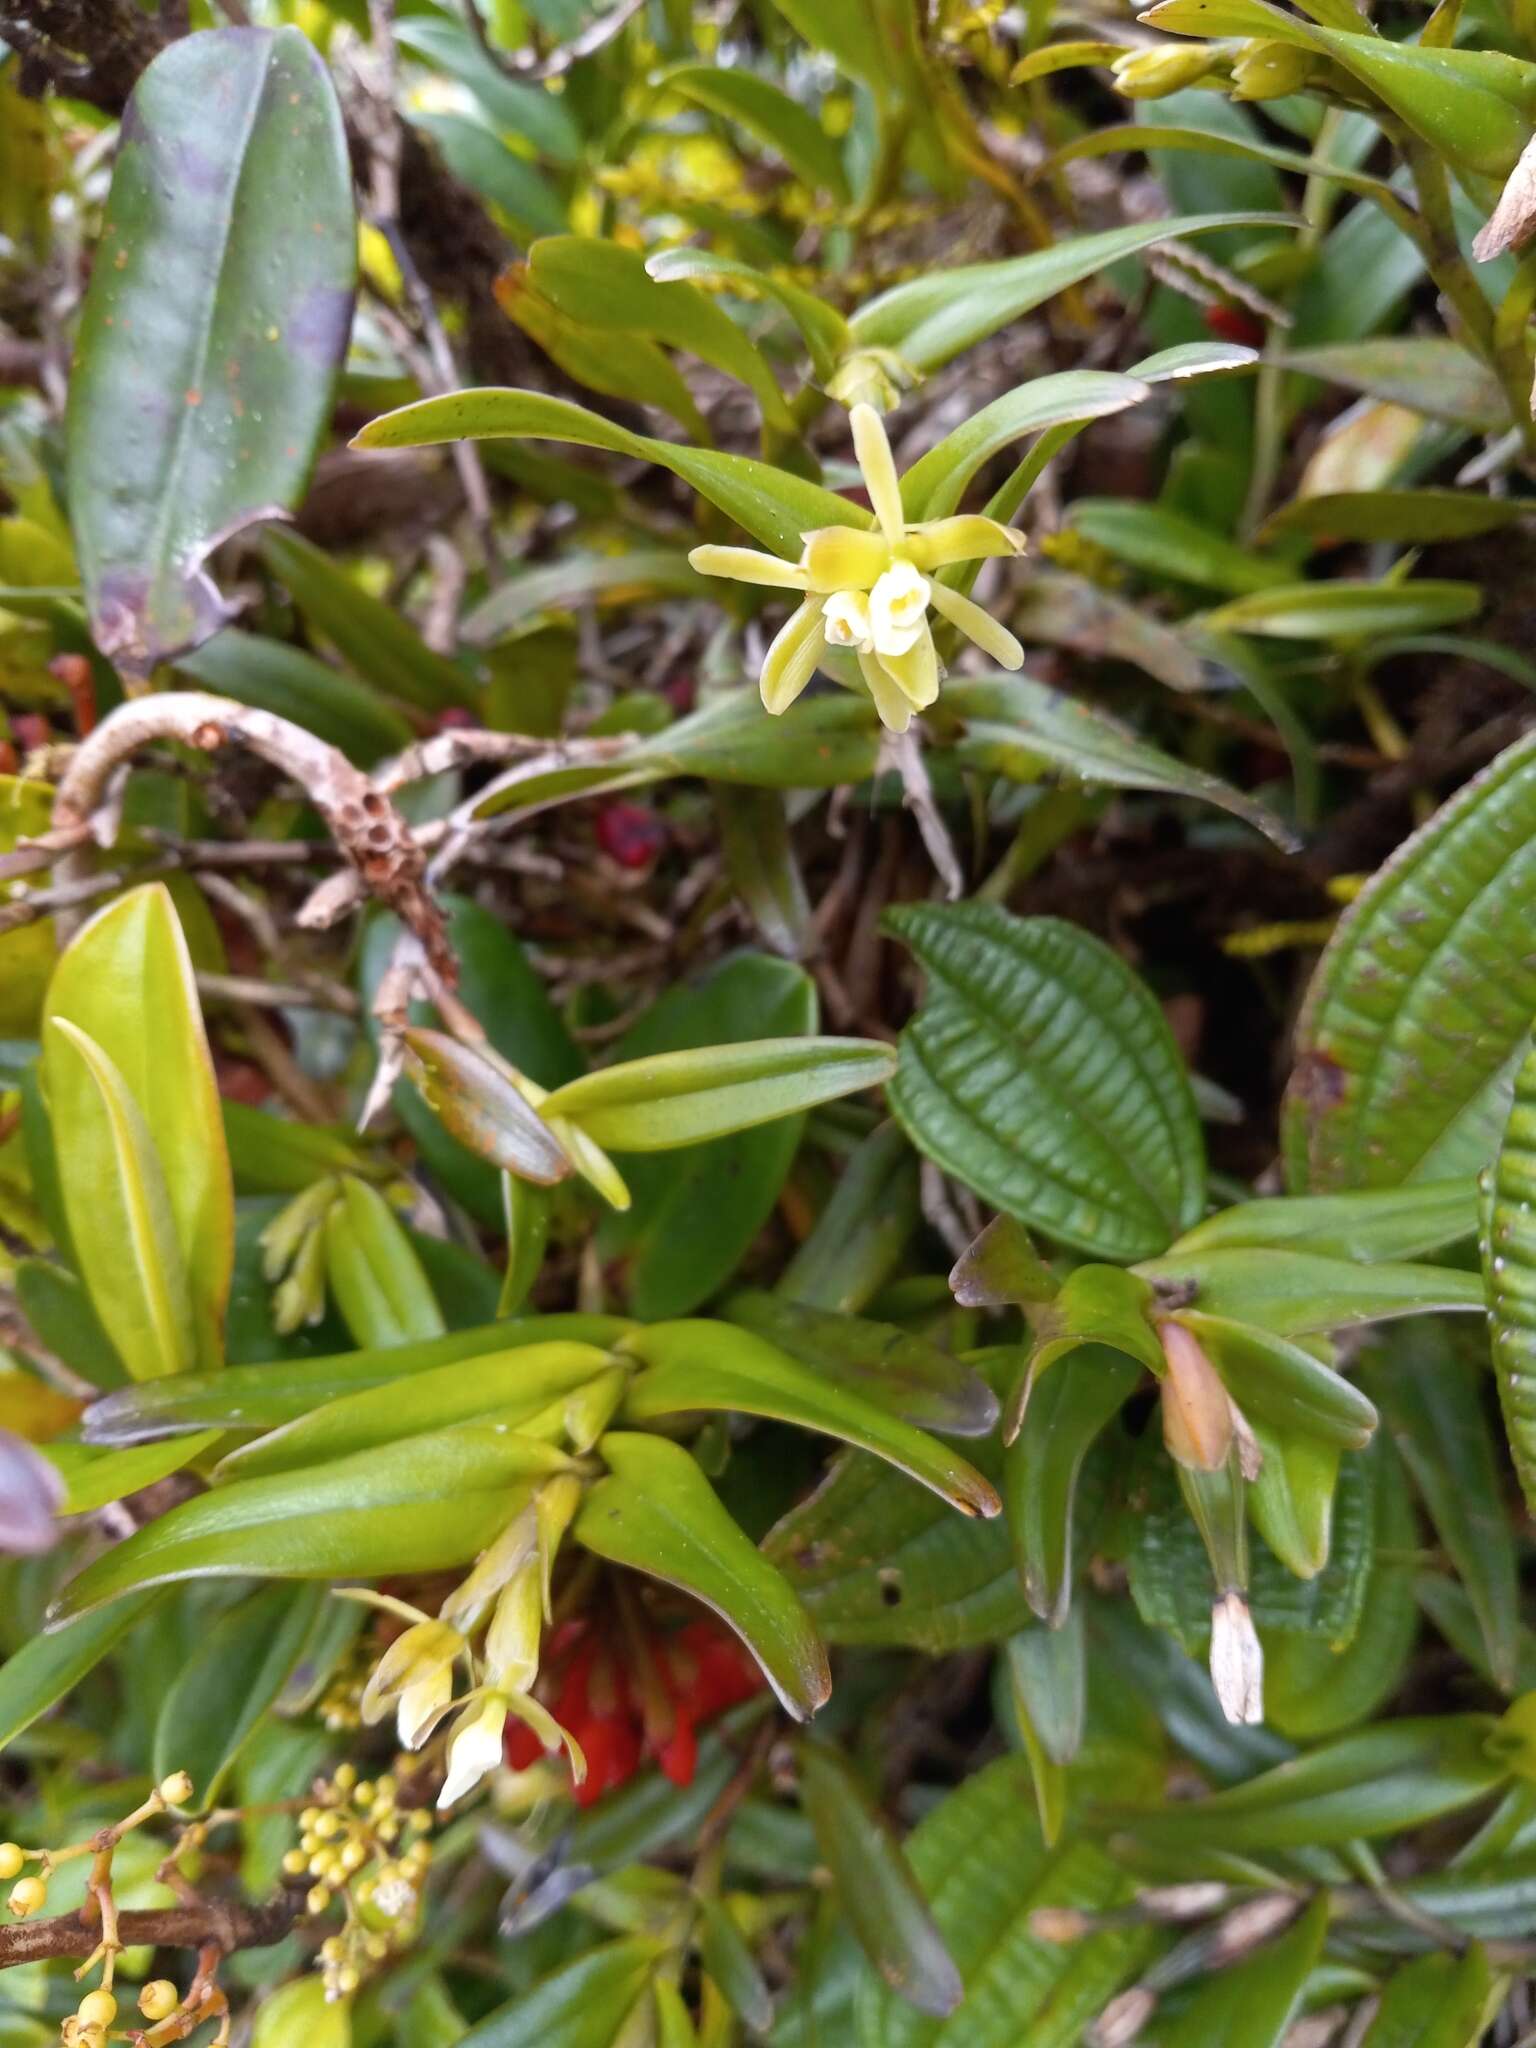 Image of Antilles star orchid